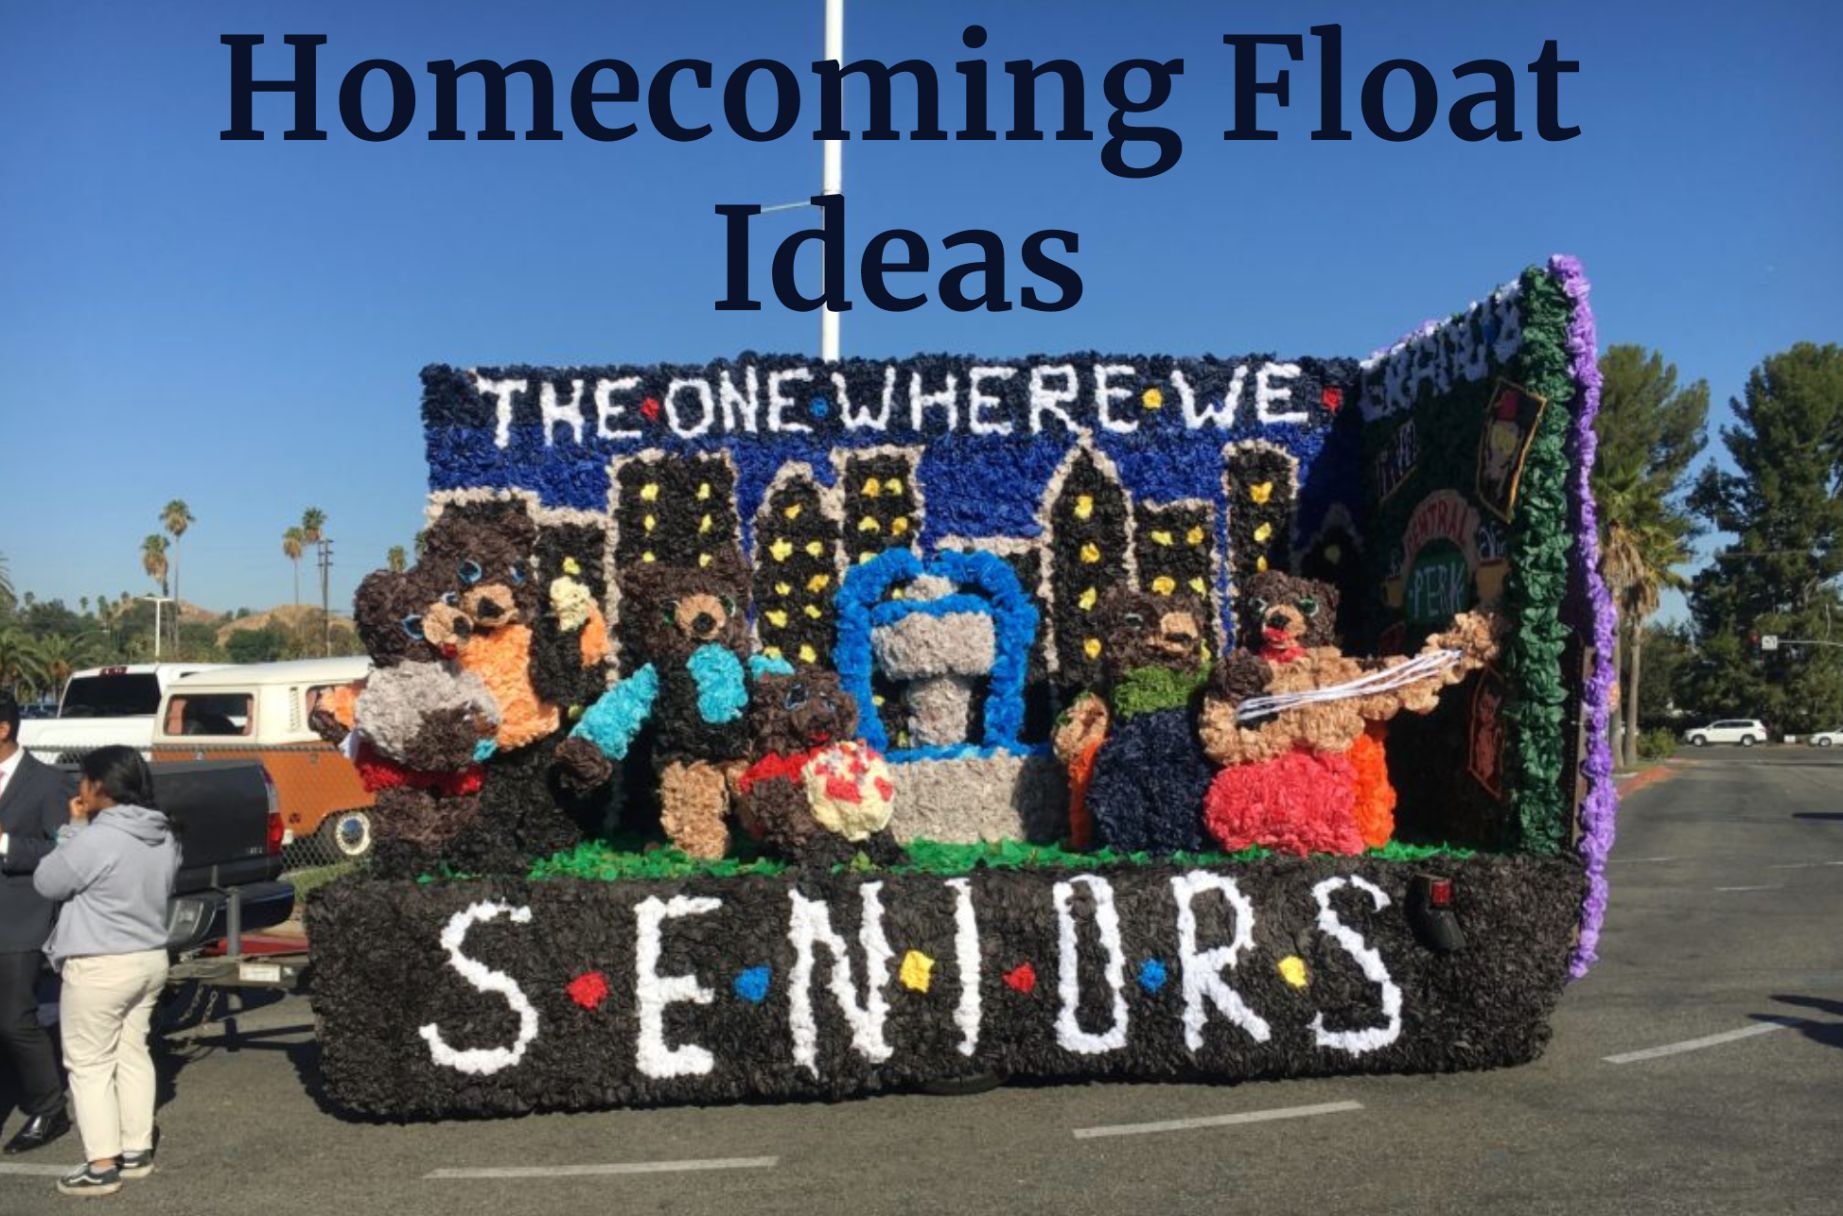 Homecoming Float Ideas